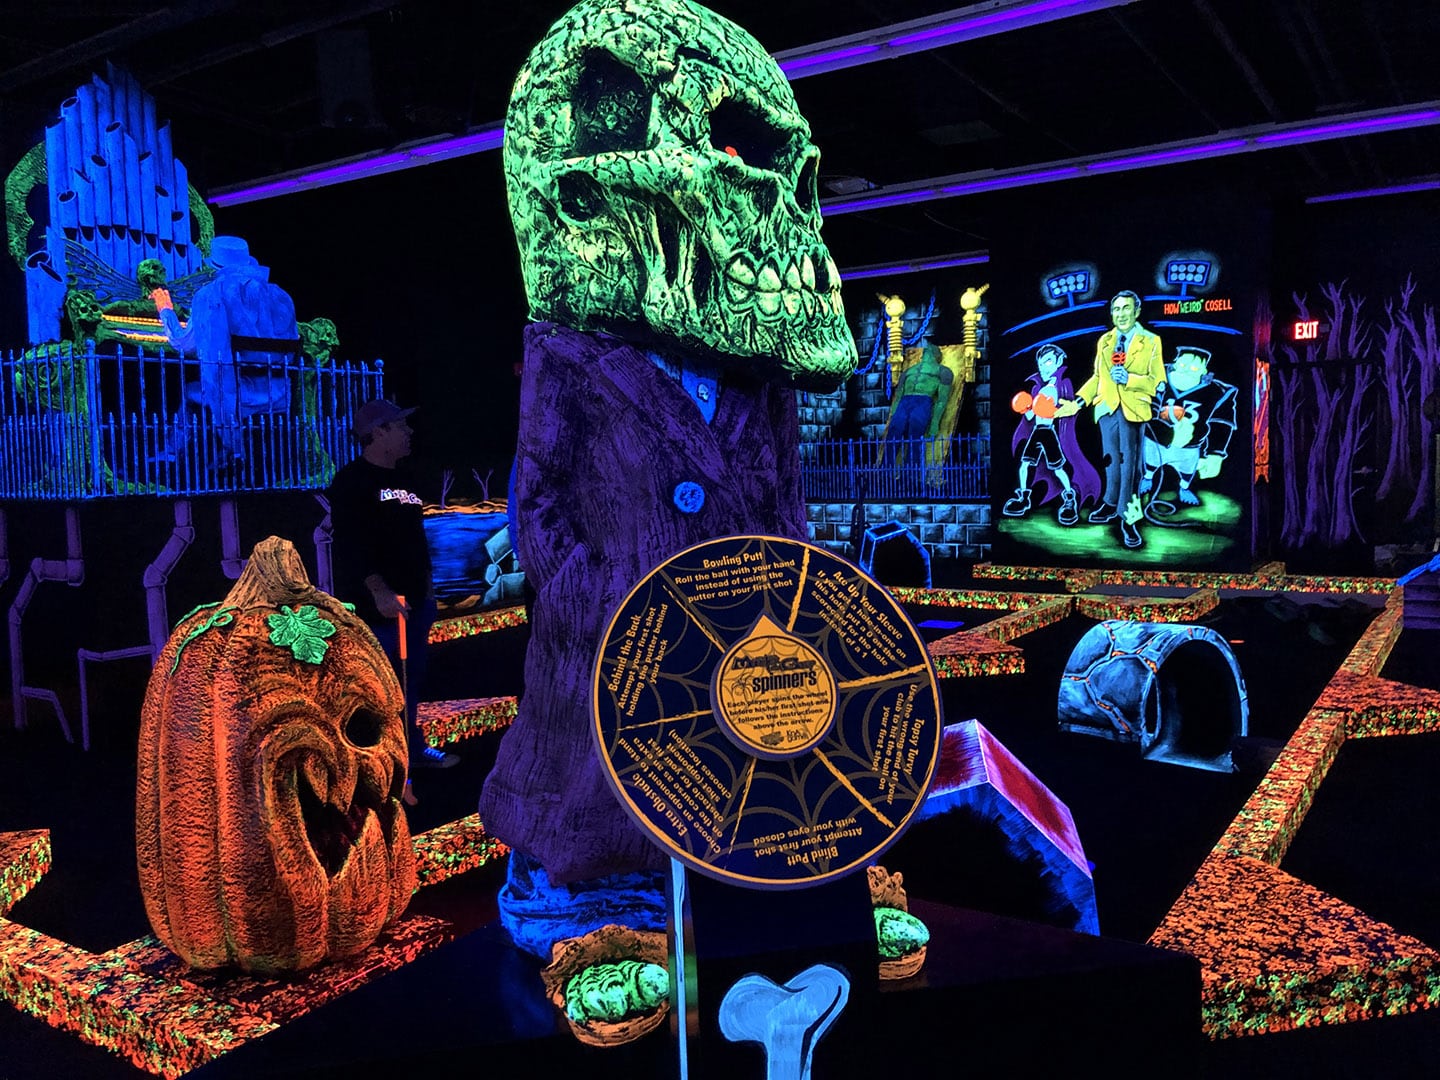 A glow-in-the-dark mini golf course at a Monster Mini Golf location.